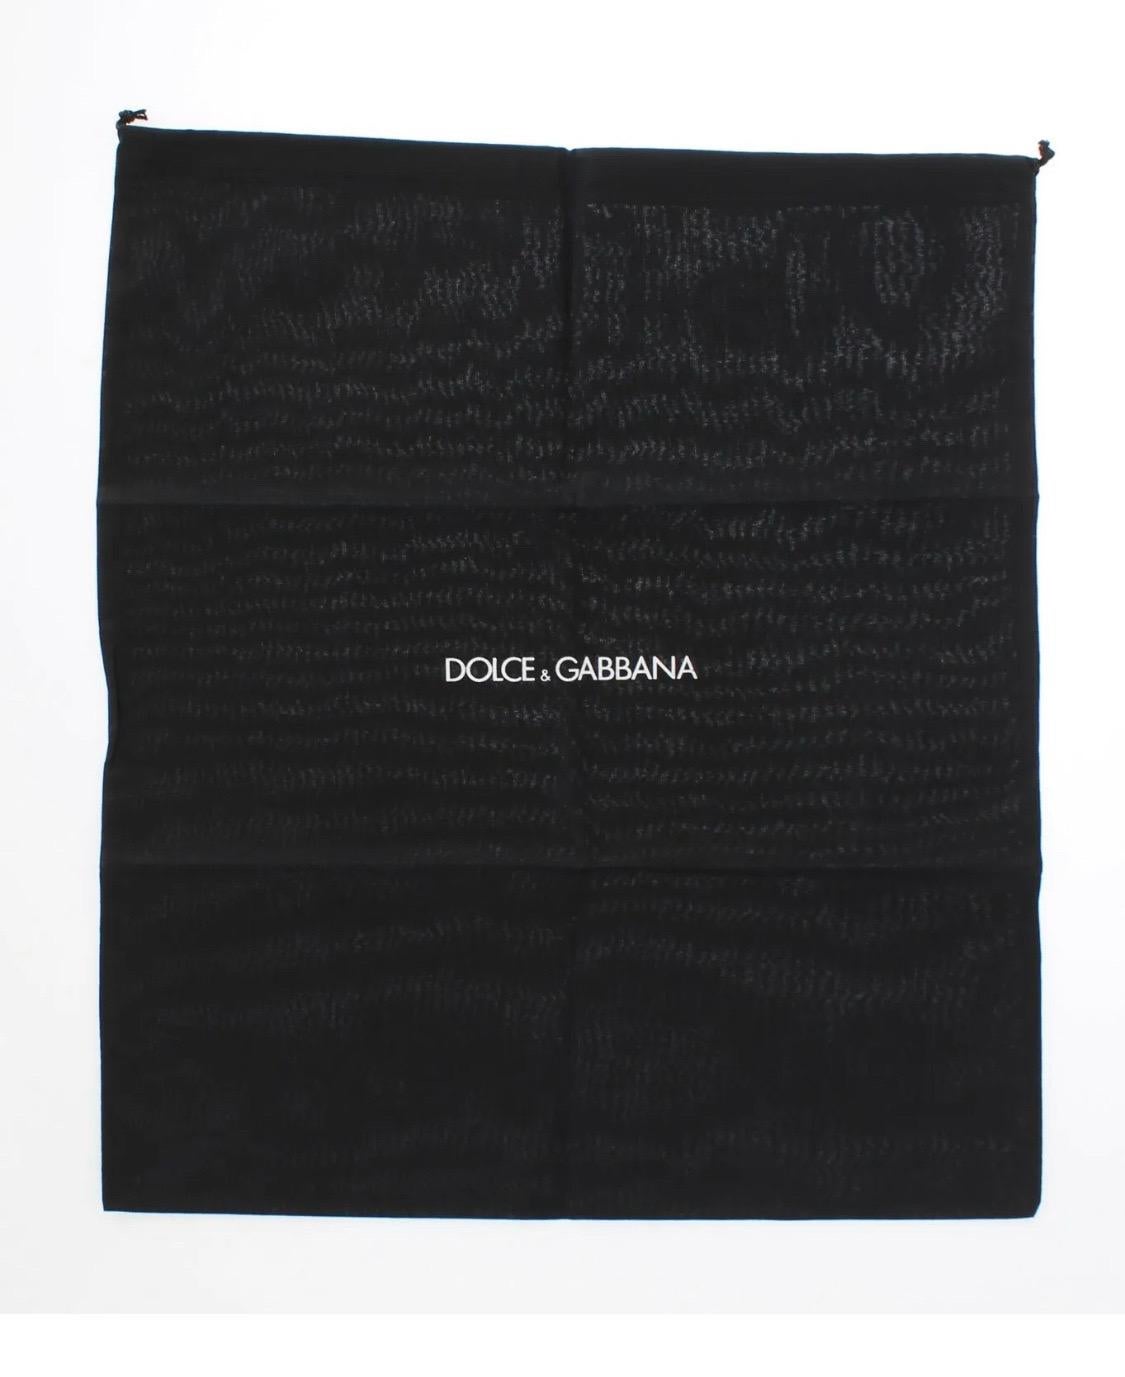 Dolce & Gabbana leather bifold wallet with DG crystals features 2